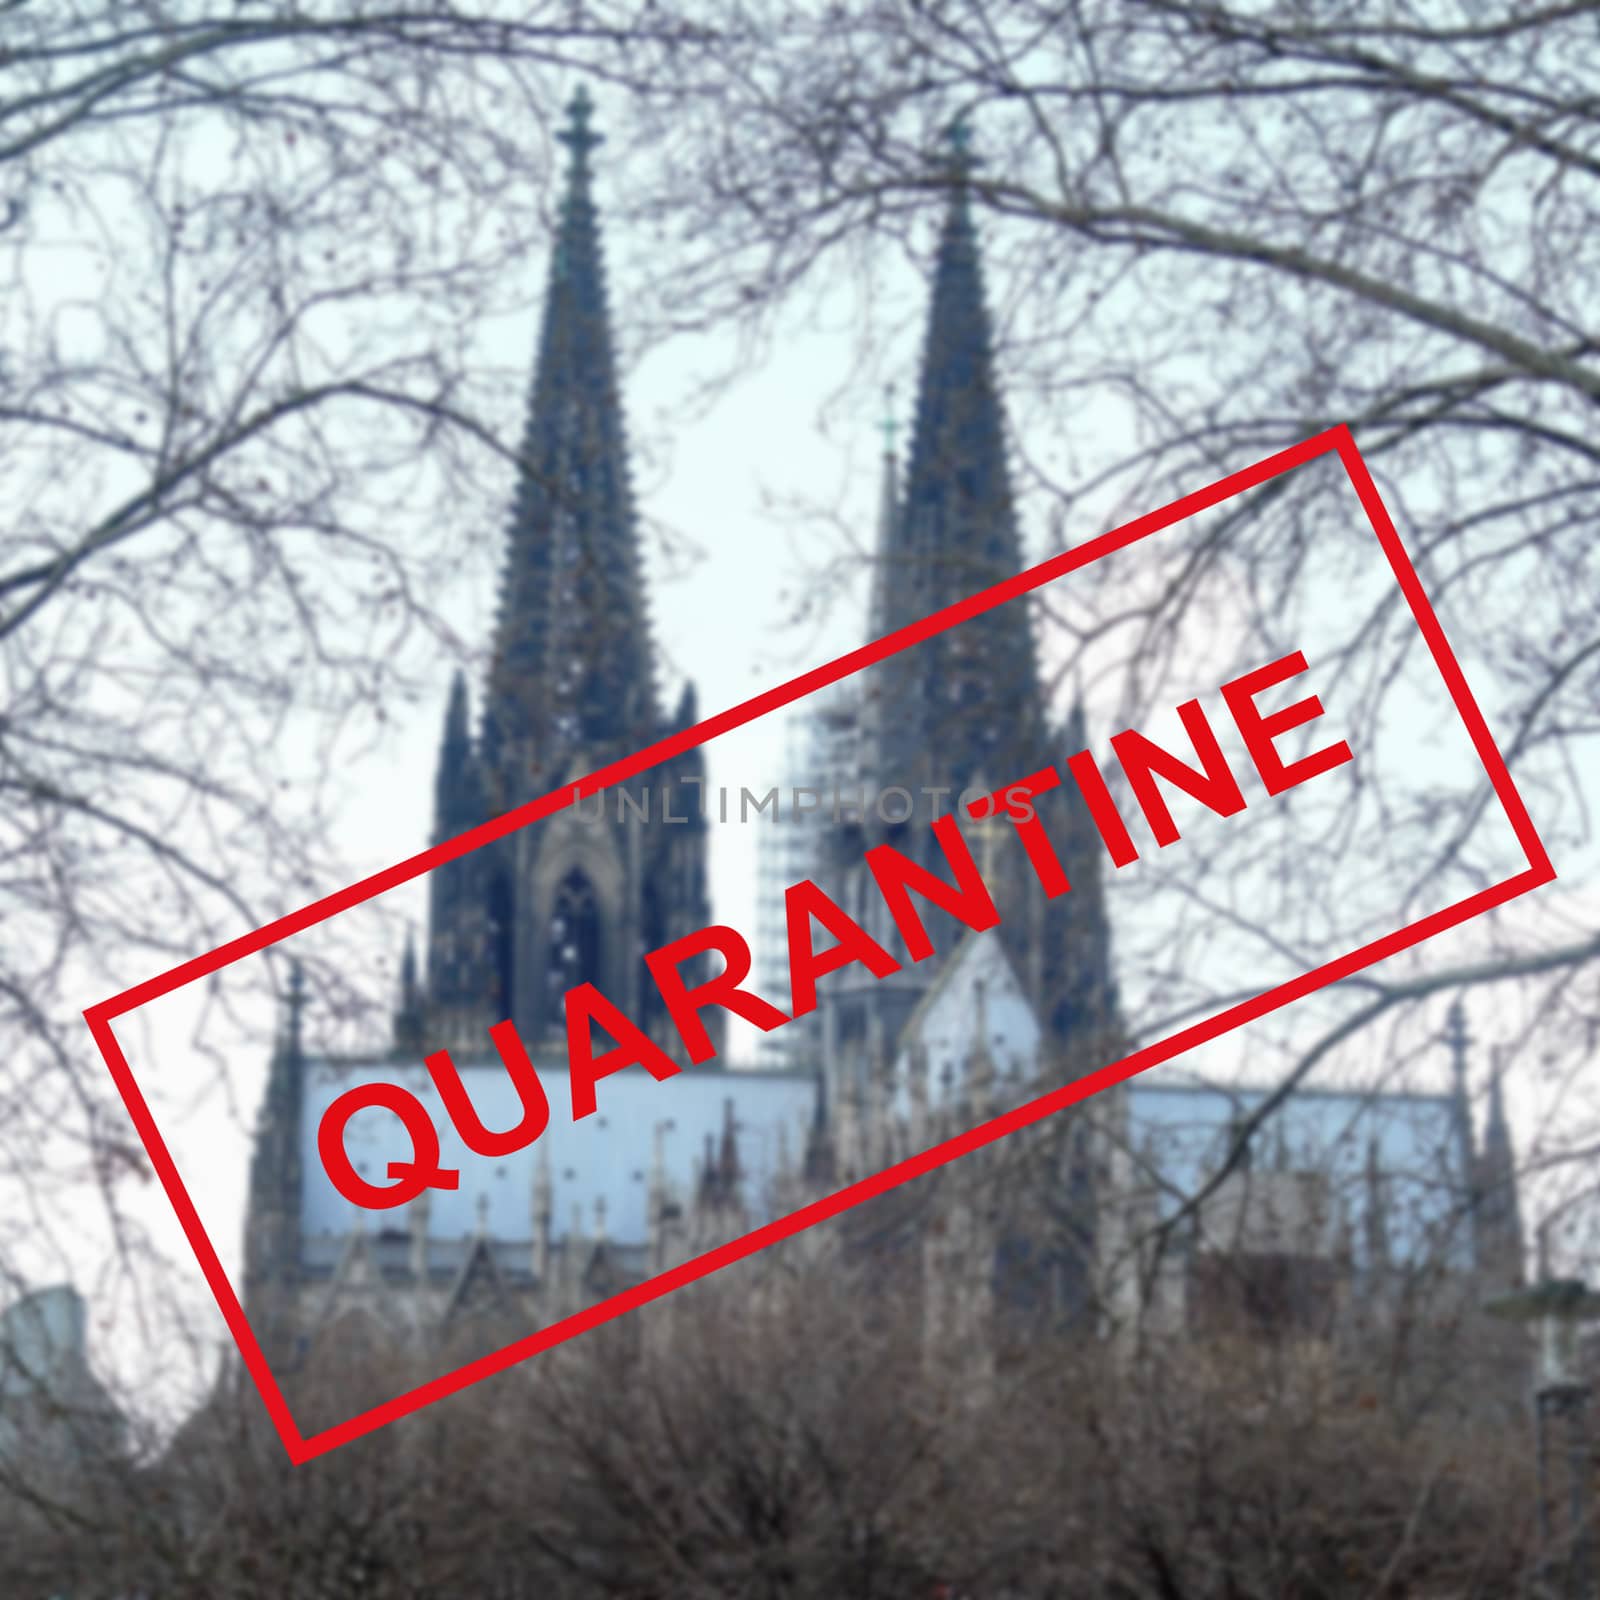 Coronavirus quarantine in Europe. Text against the background of Cologne Cathedral in Germany. Concept of the economy and financial markets affected by the corona virus outbreak and fears of a pandemic.